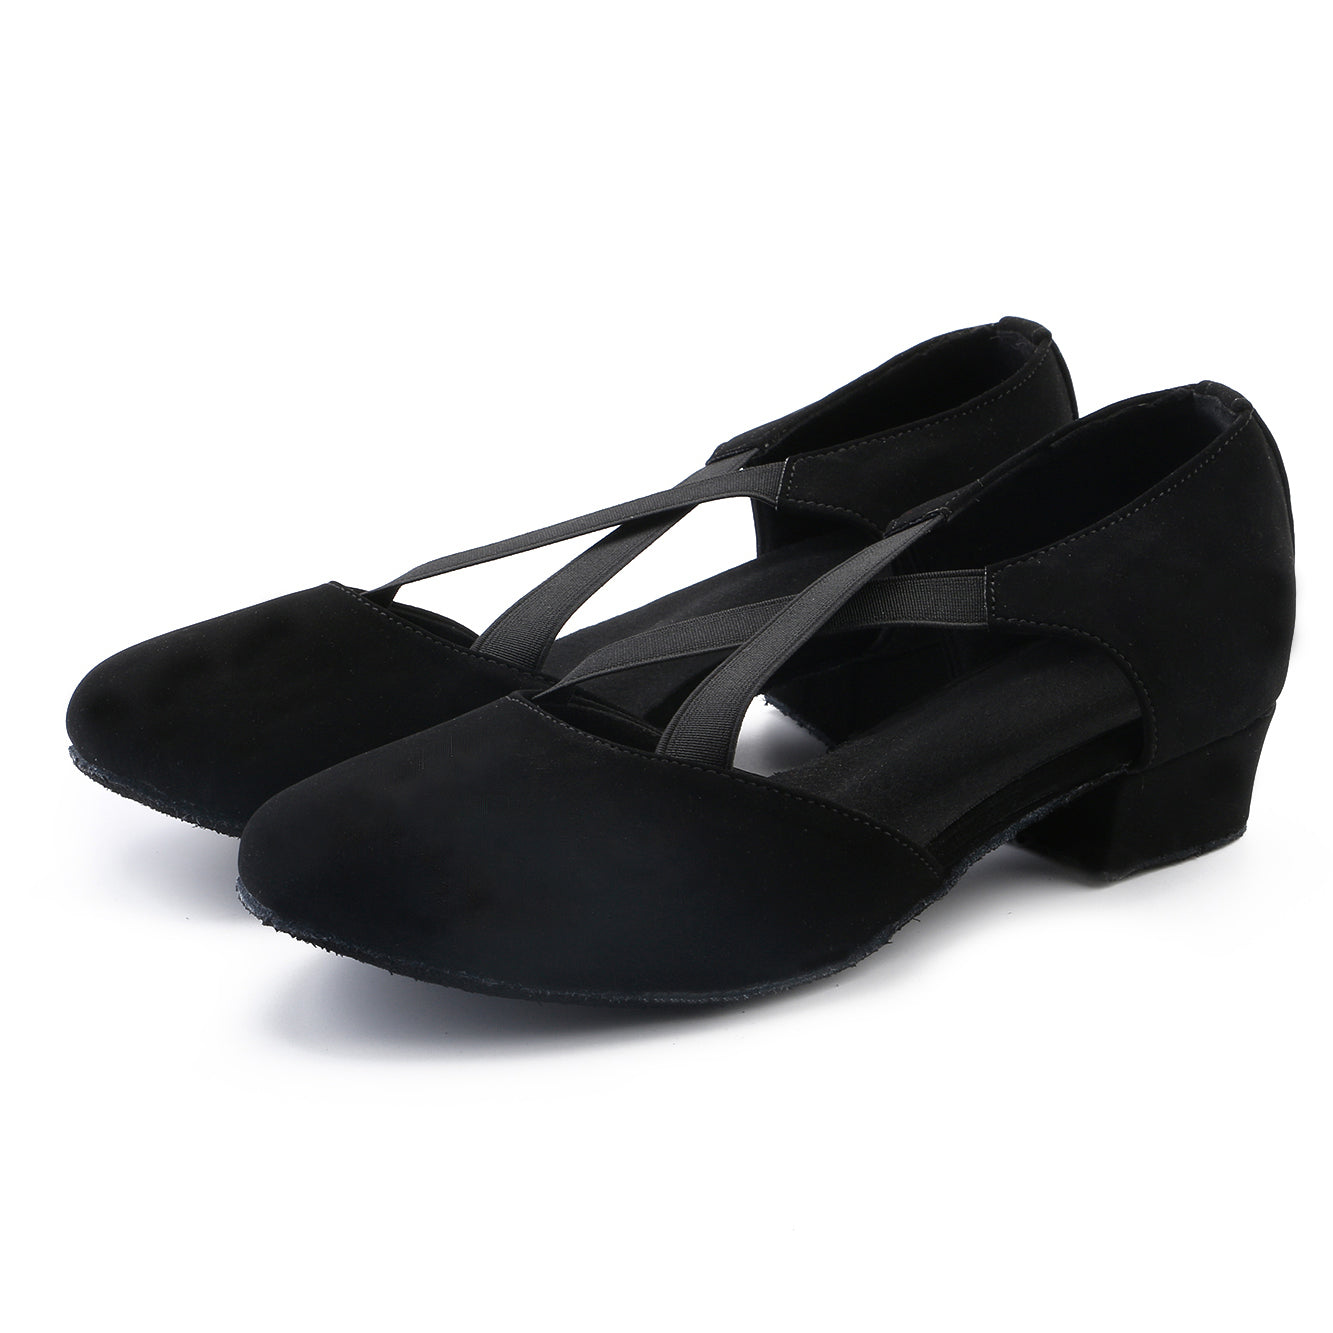 Ladies black low heel ballroom dancing shoes with suede sole for tango latin practice, closed-toe design (PD7307B)8